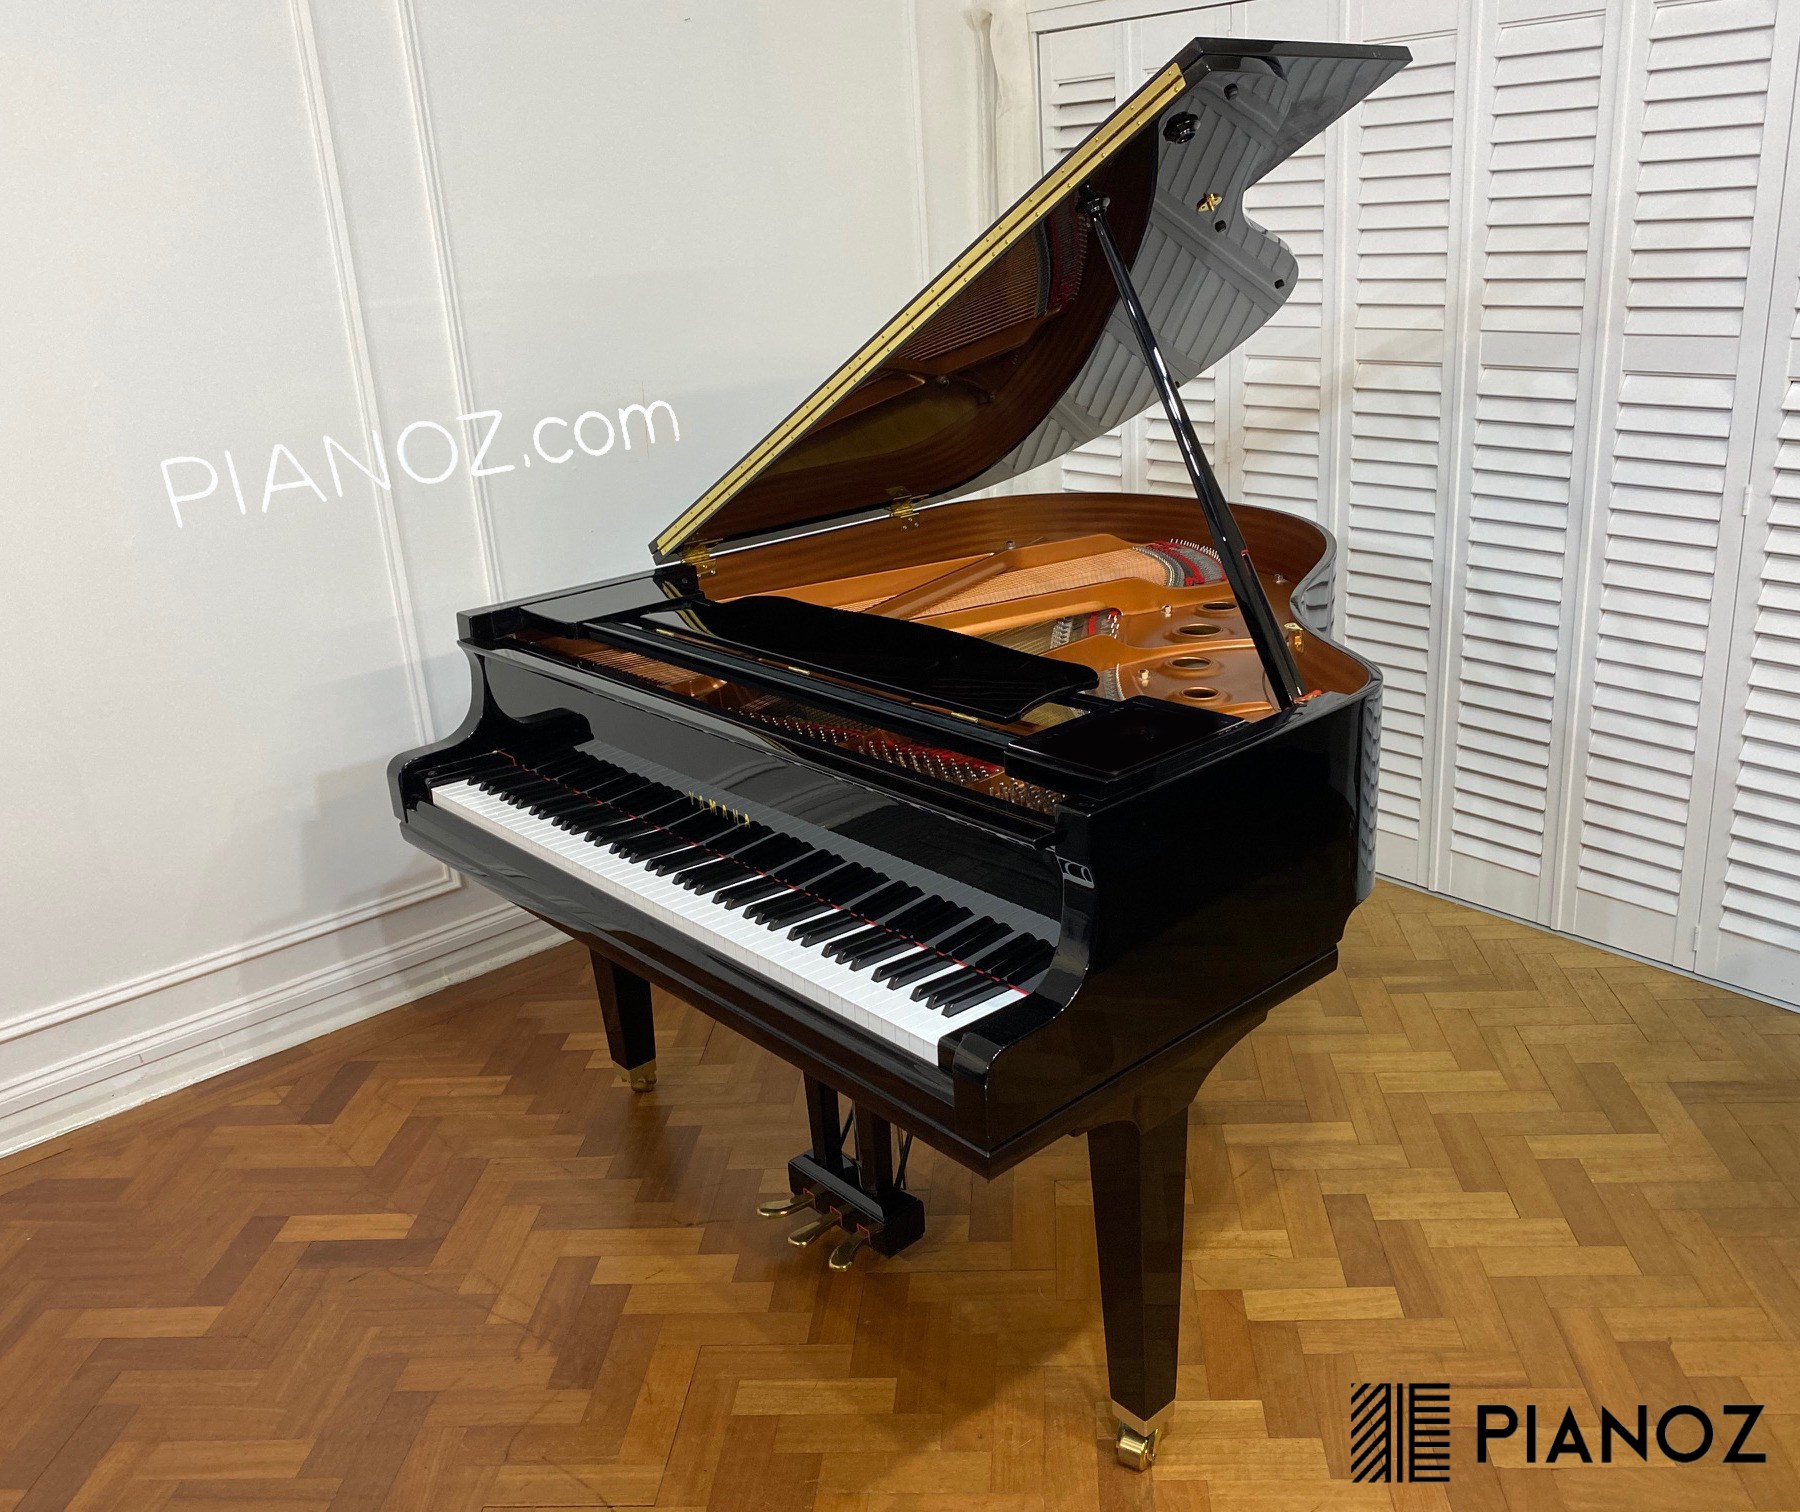 Yamaha C3 Silent 2007 Grand Piano piano for sale in UK